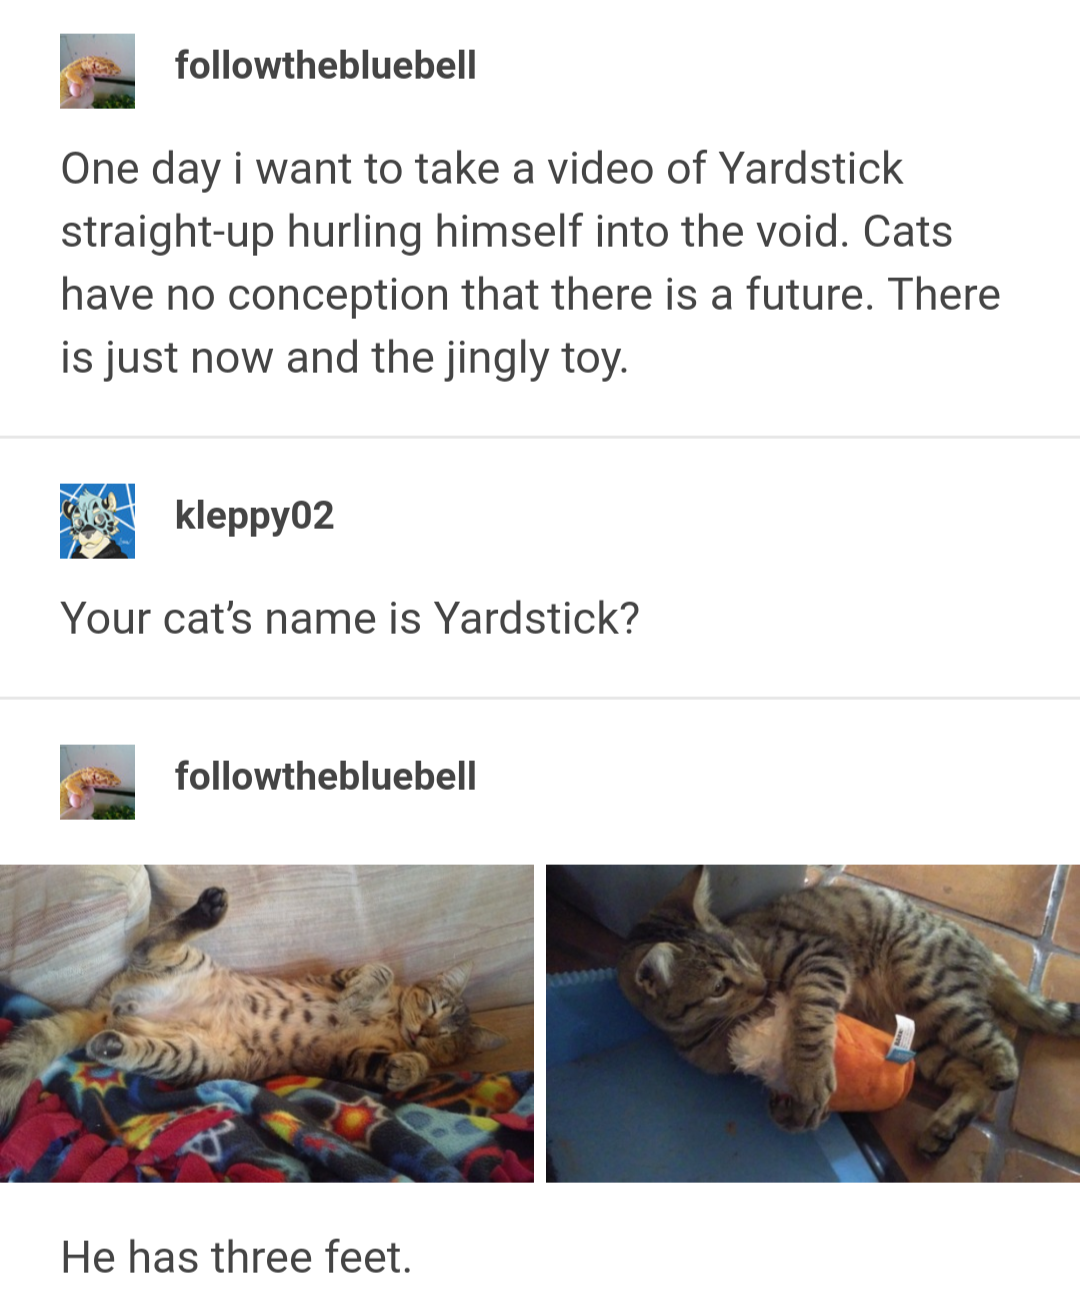 yardstick the cat - thebluebell One day i want to take a video of Yardstick straightup hurling himself into the void. Cats have no conception that there is a future. There is just now and the jingly toy. Pl kleppy02 Your cat's name is Yardstick? thebluebe